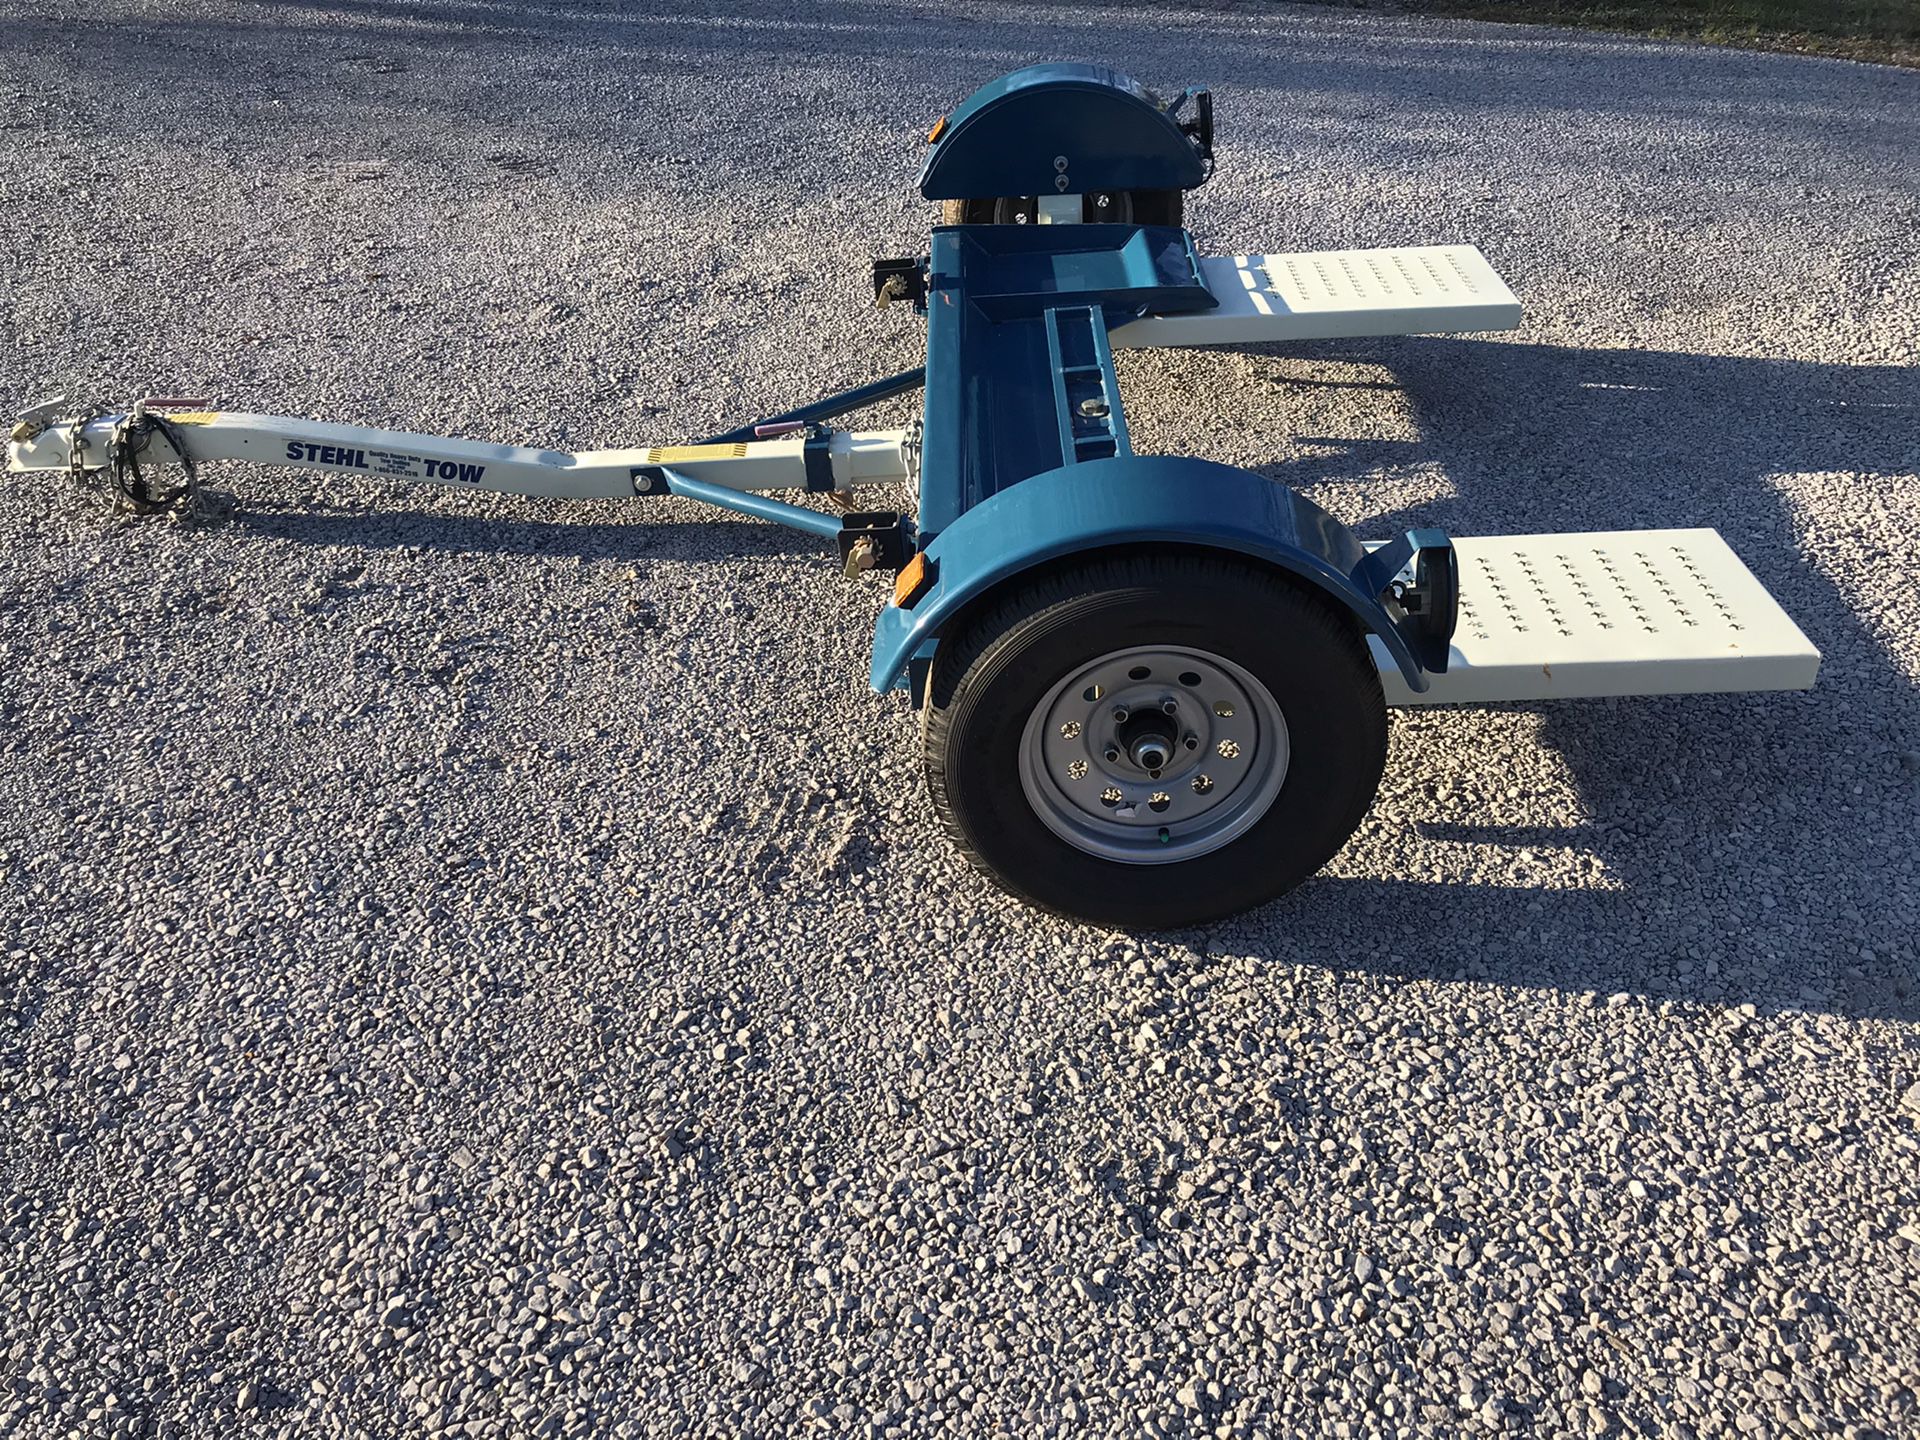 Stehl Tow Car Dolly - Used 1 time